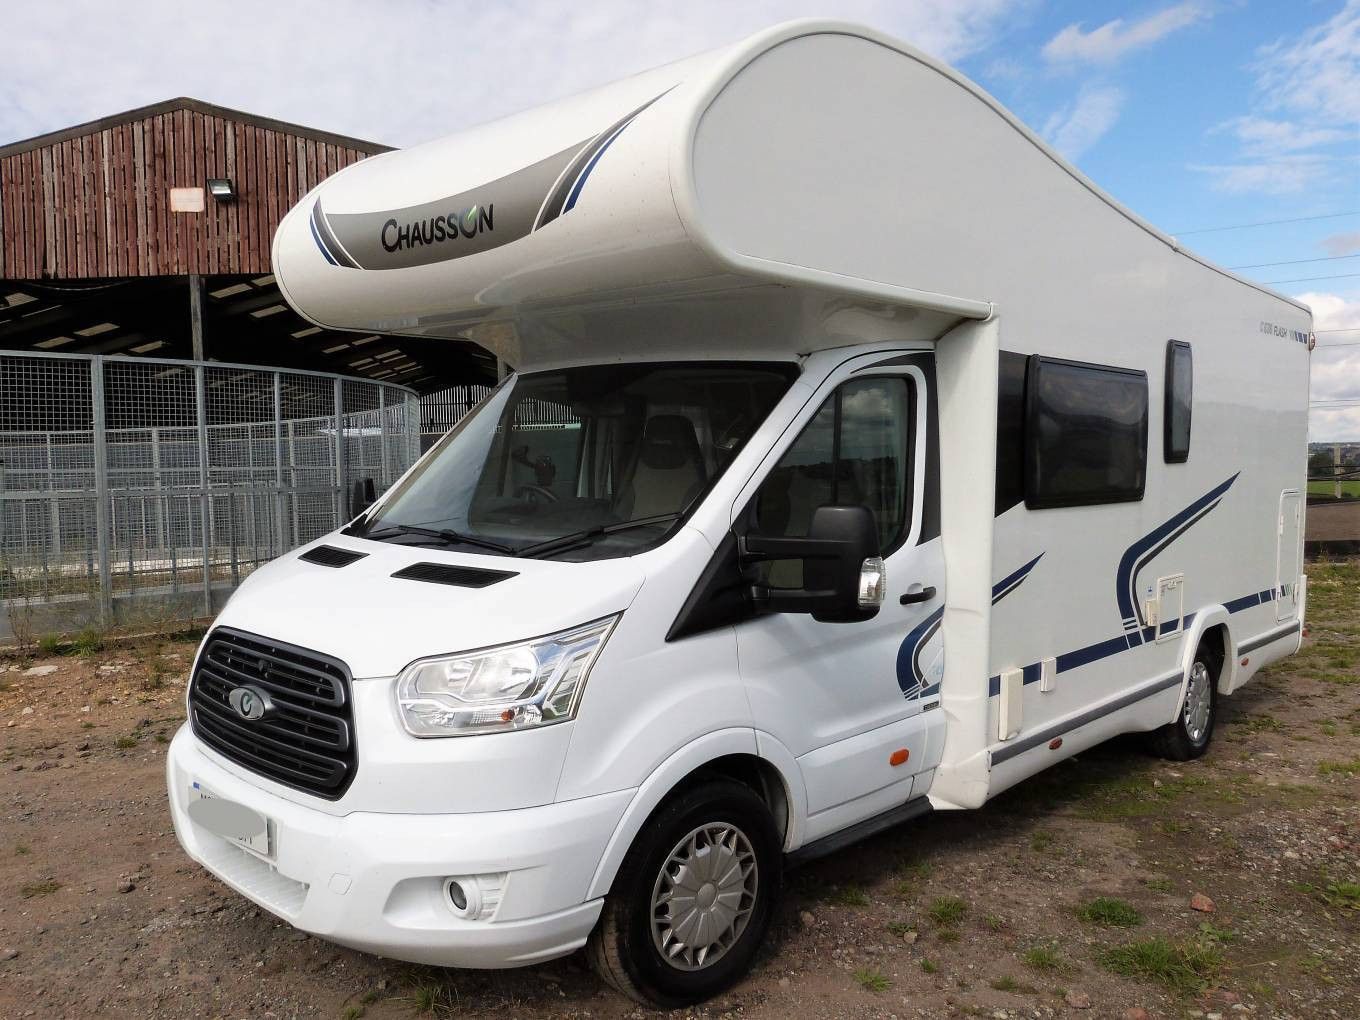 A  Motorhome called Chausson-C636 and  for hire in High Wycombe, Buckinghamshire